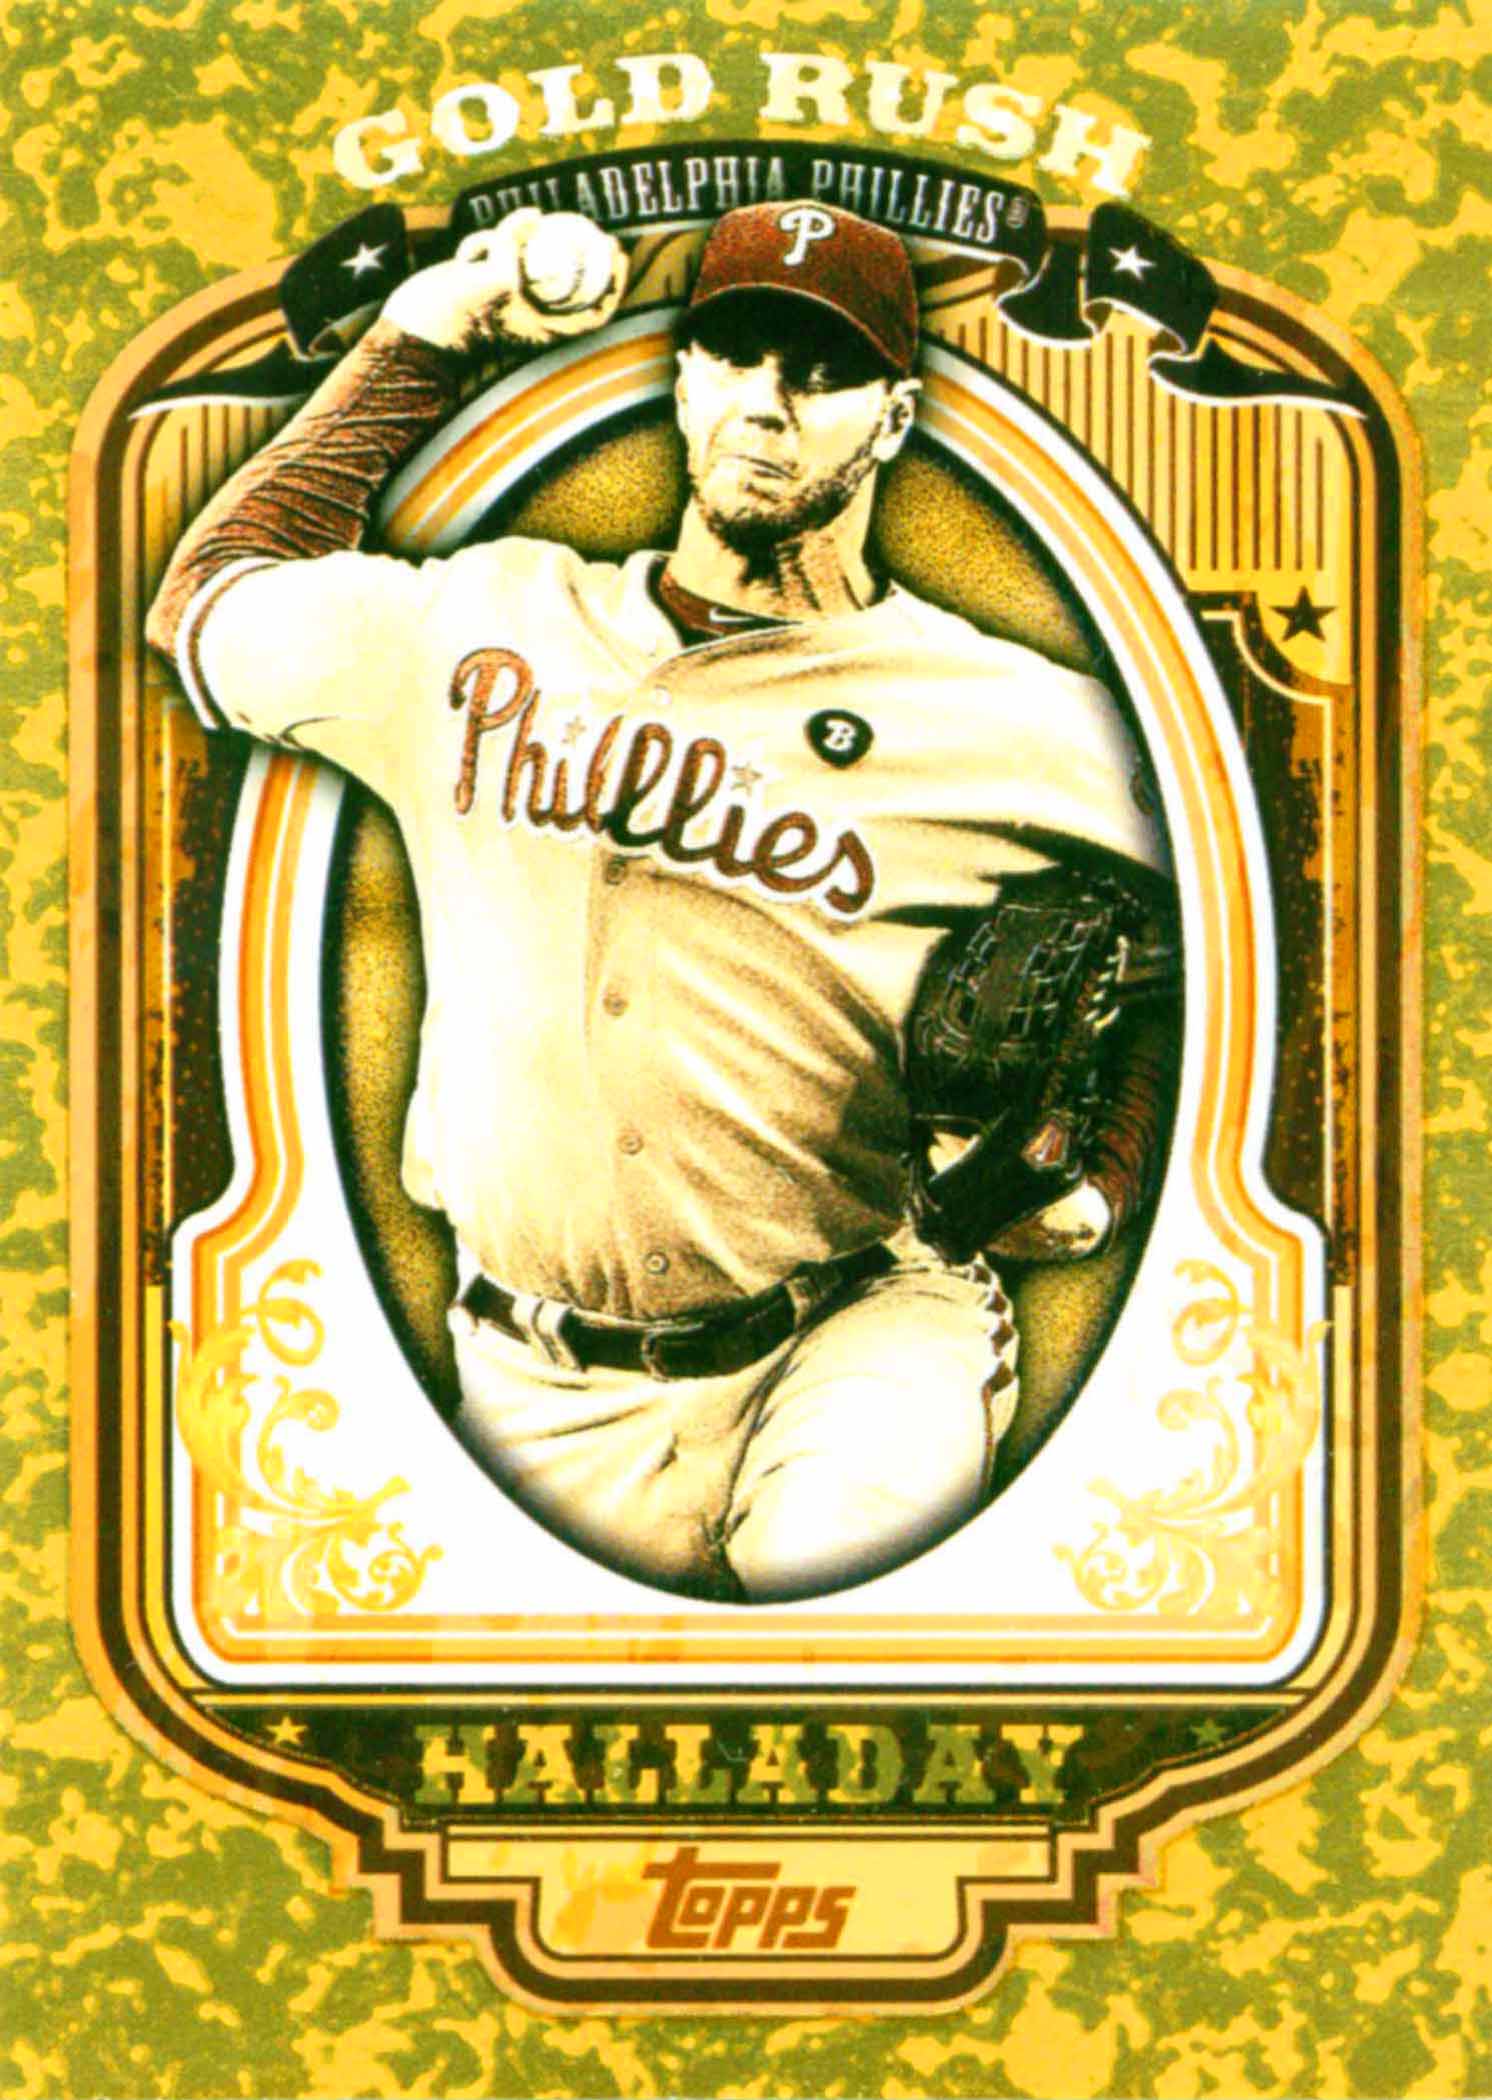 2011 Topps Allen and Ginter Glossy